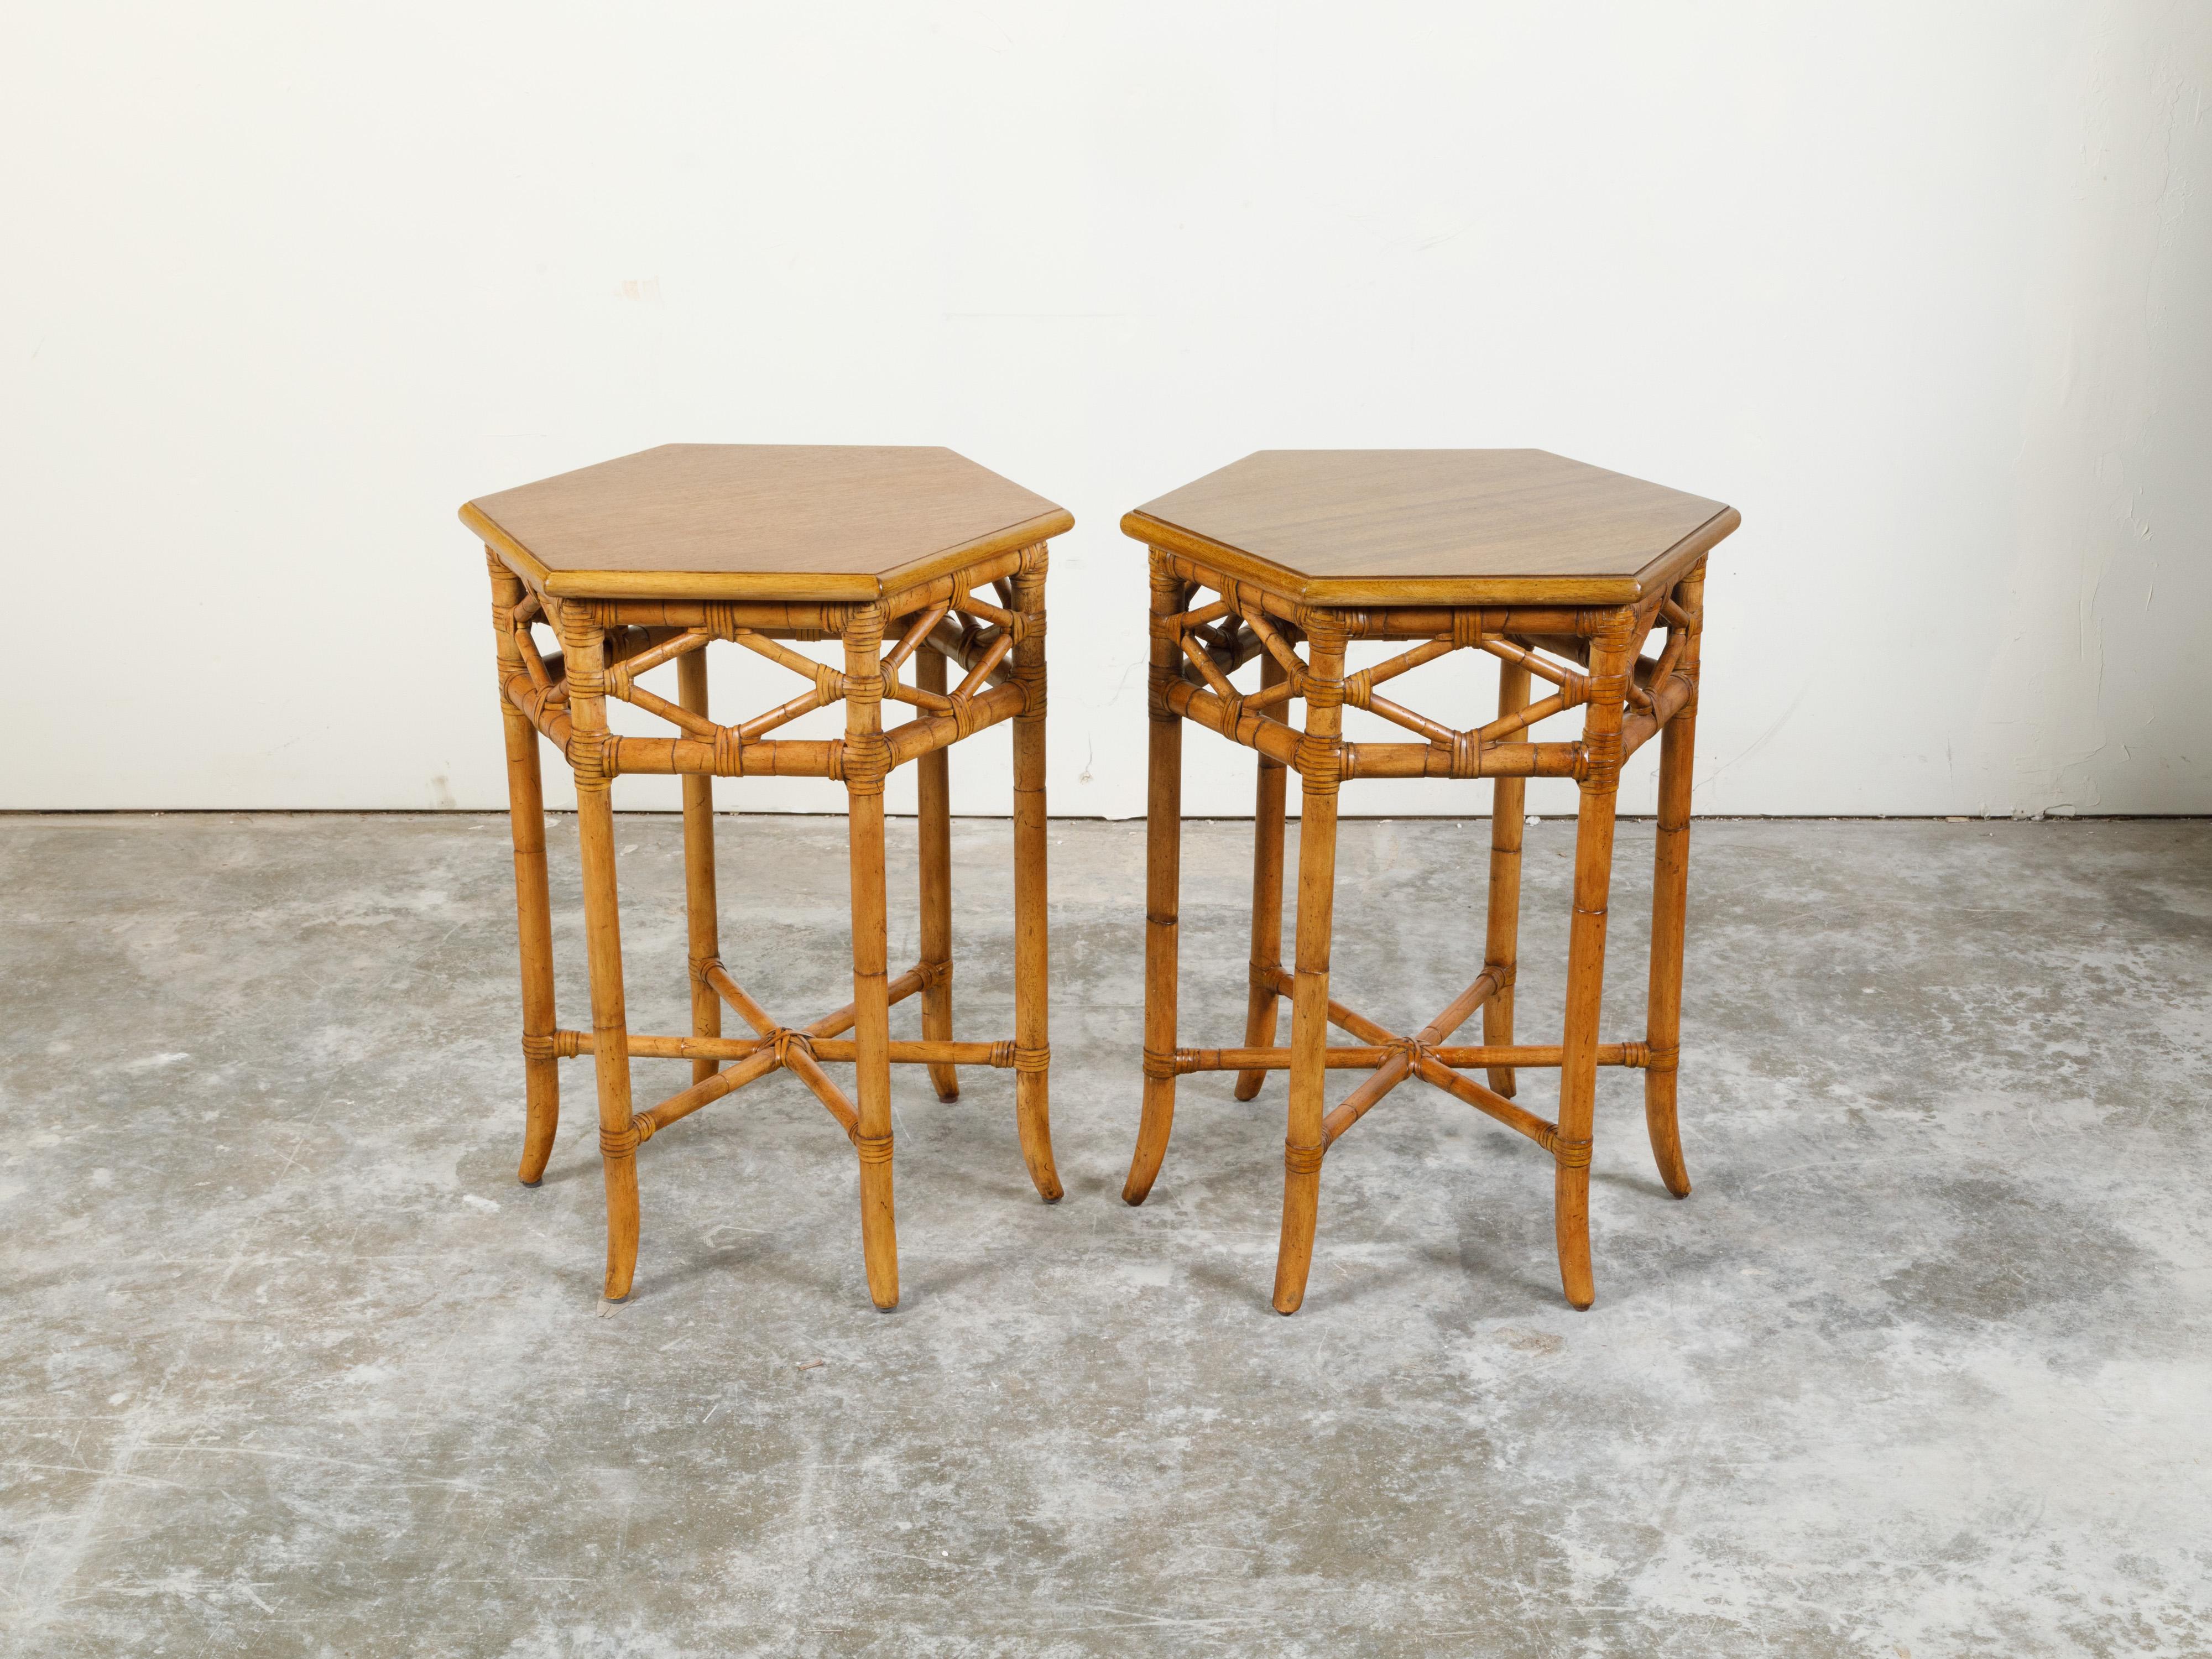 20th Century Pair of English Chinoiserie Style Faux Bamboo Side Tables with Hexagonal Tops